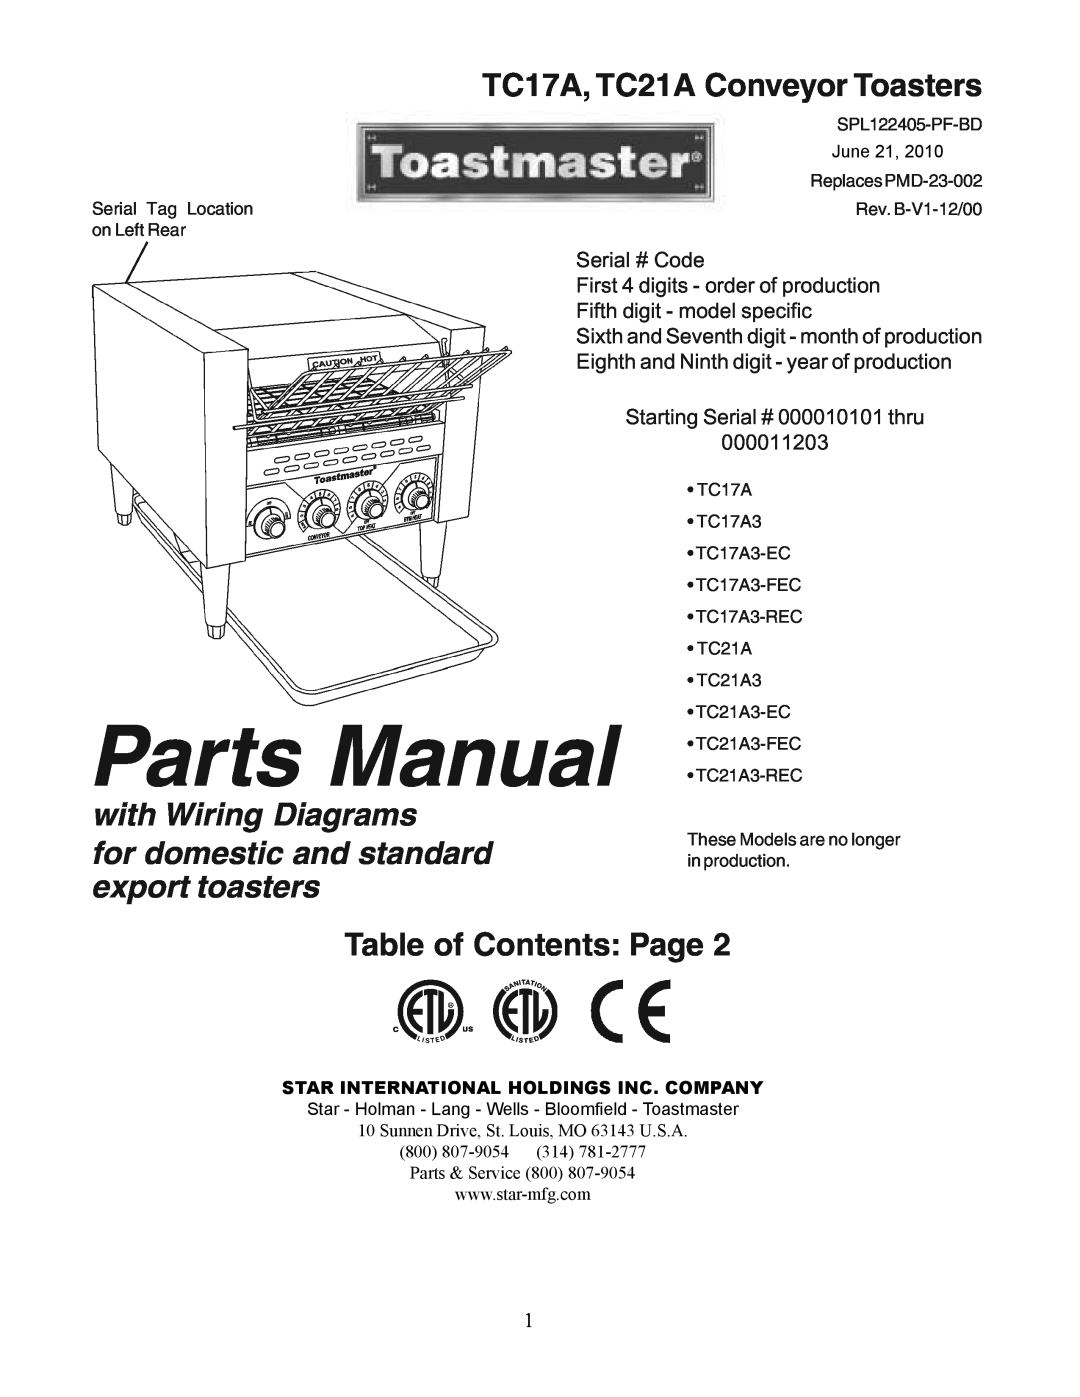 Toastmaster TC21A installation manual Conveyor Toaster, Owners Operating And Installation Manual, Warning In Case Of Fire 